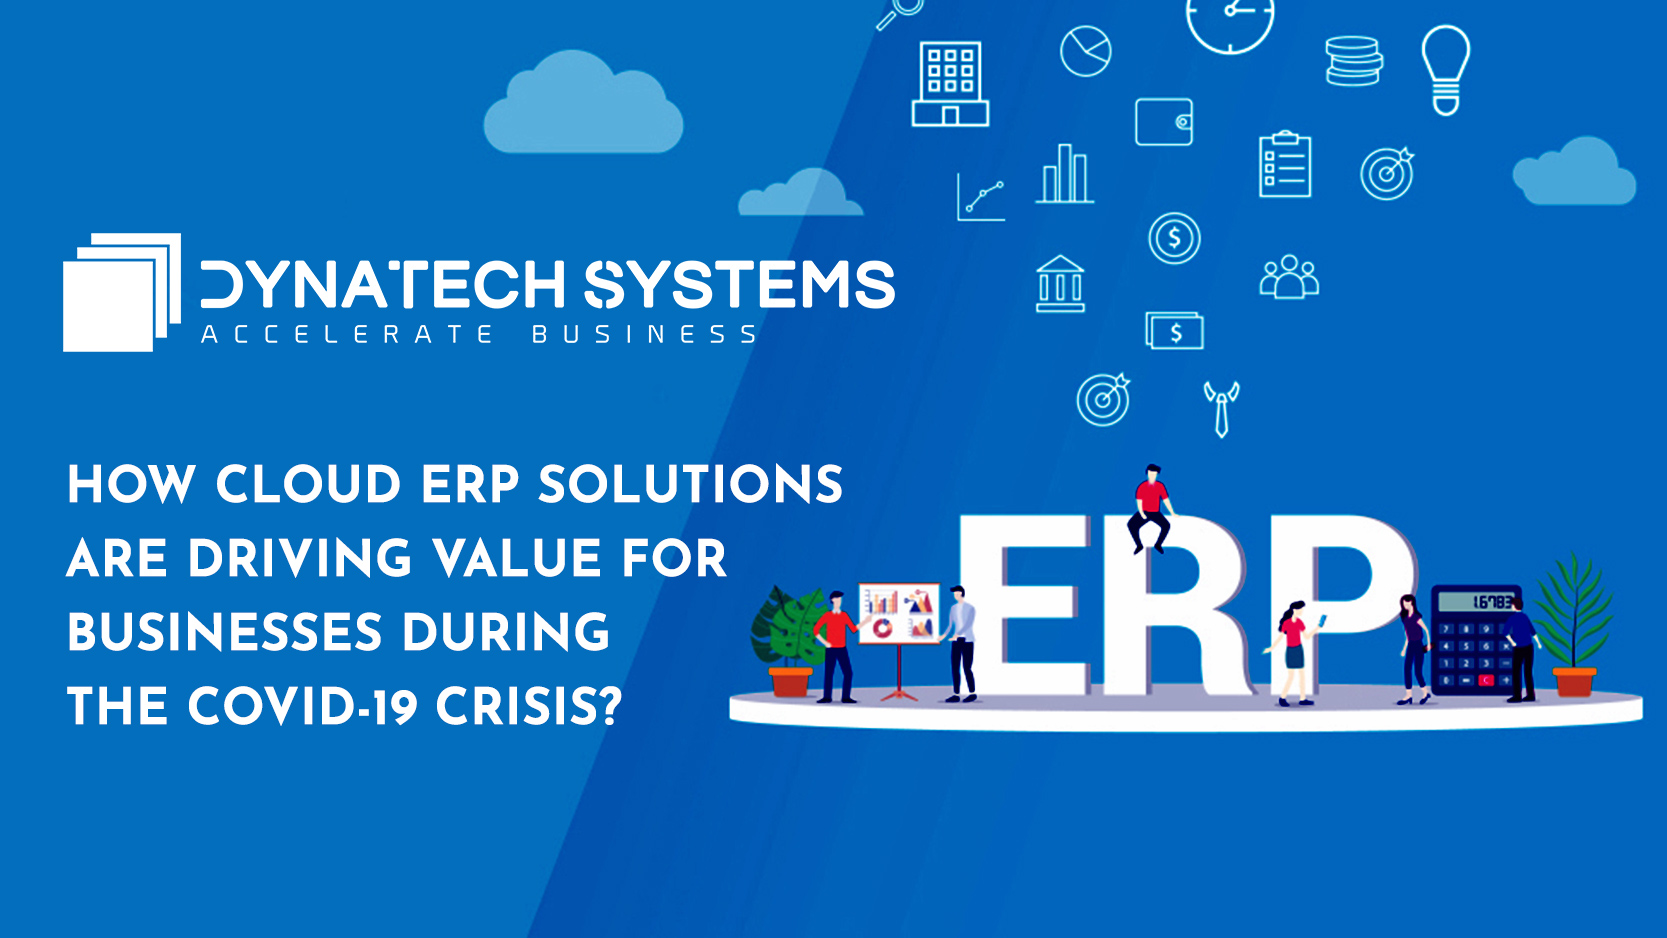 How Cloud ERP Solutions are driving value for businesses during the COVID-19 Crisis?